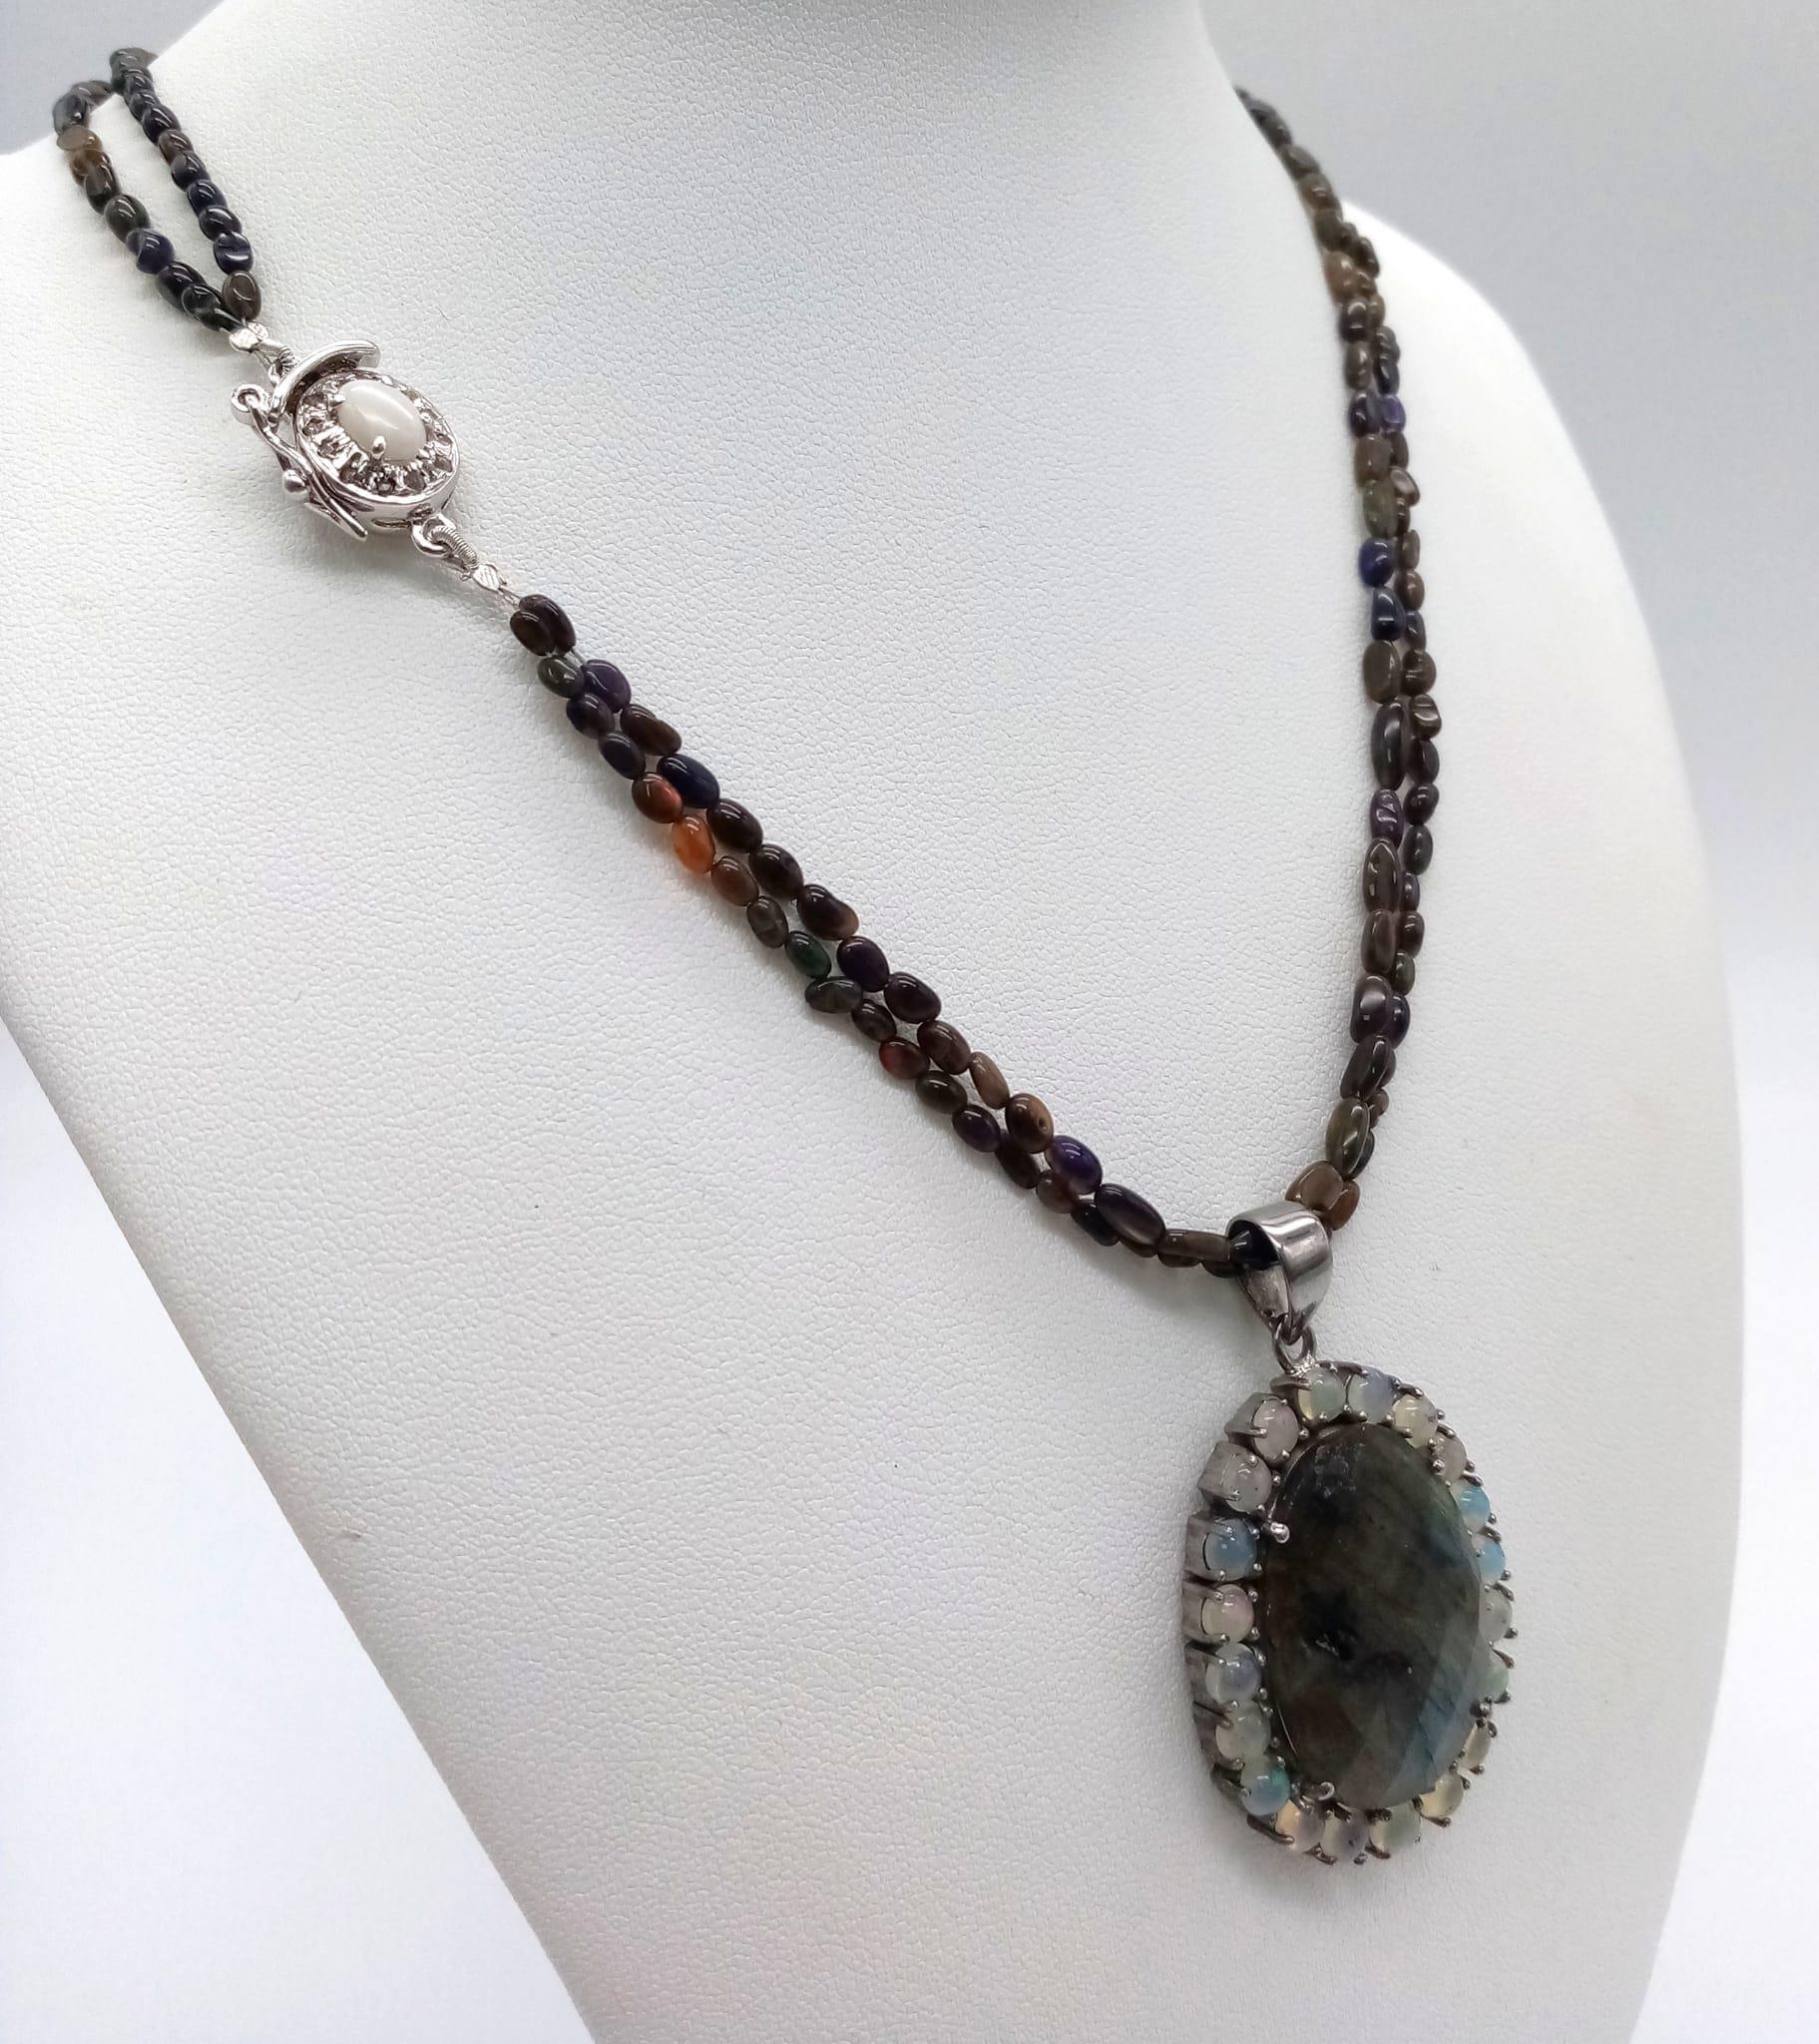 An Ethiopian Black Opal Bead Necklace with a Labradorite 925 Silver Pendant with White Fire Opal - Image 2 of 5